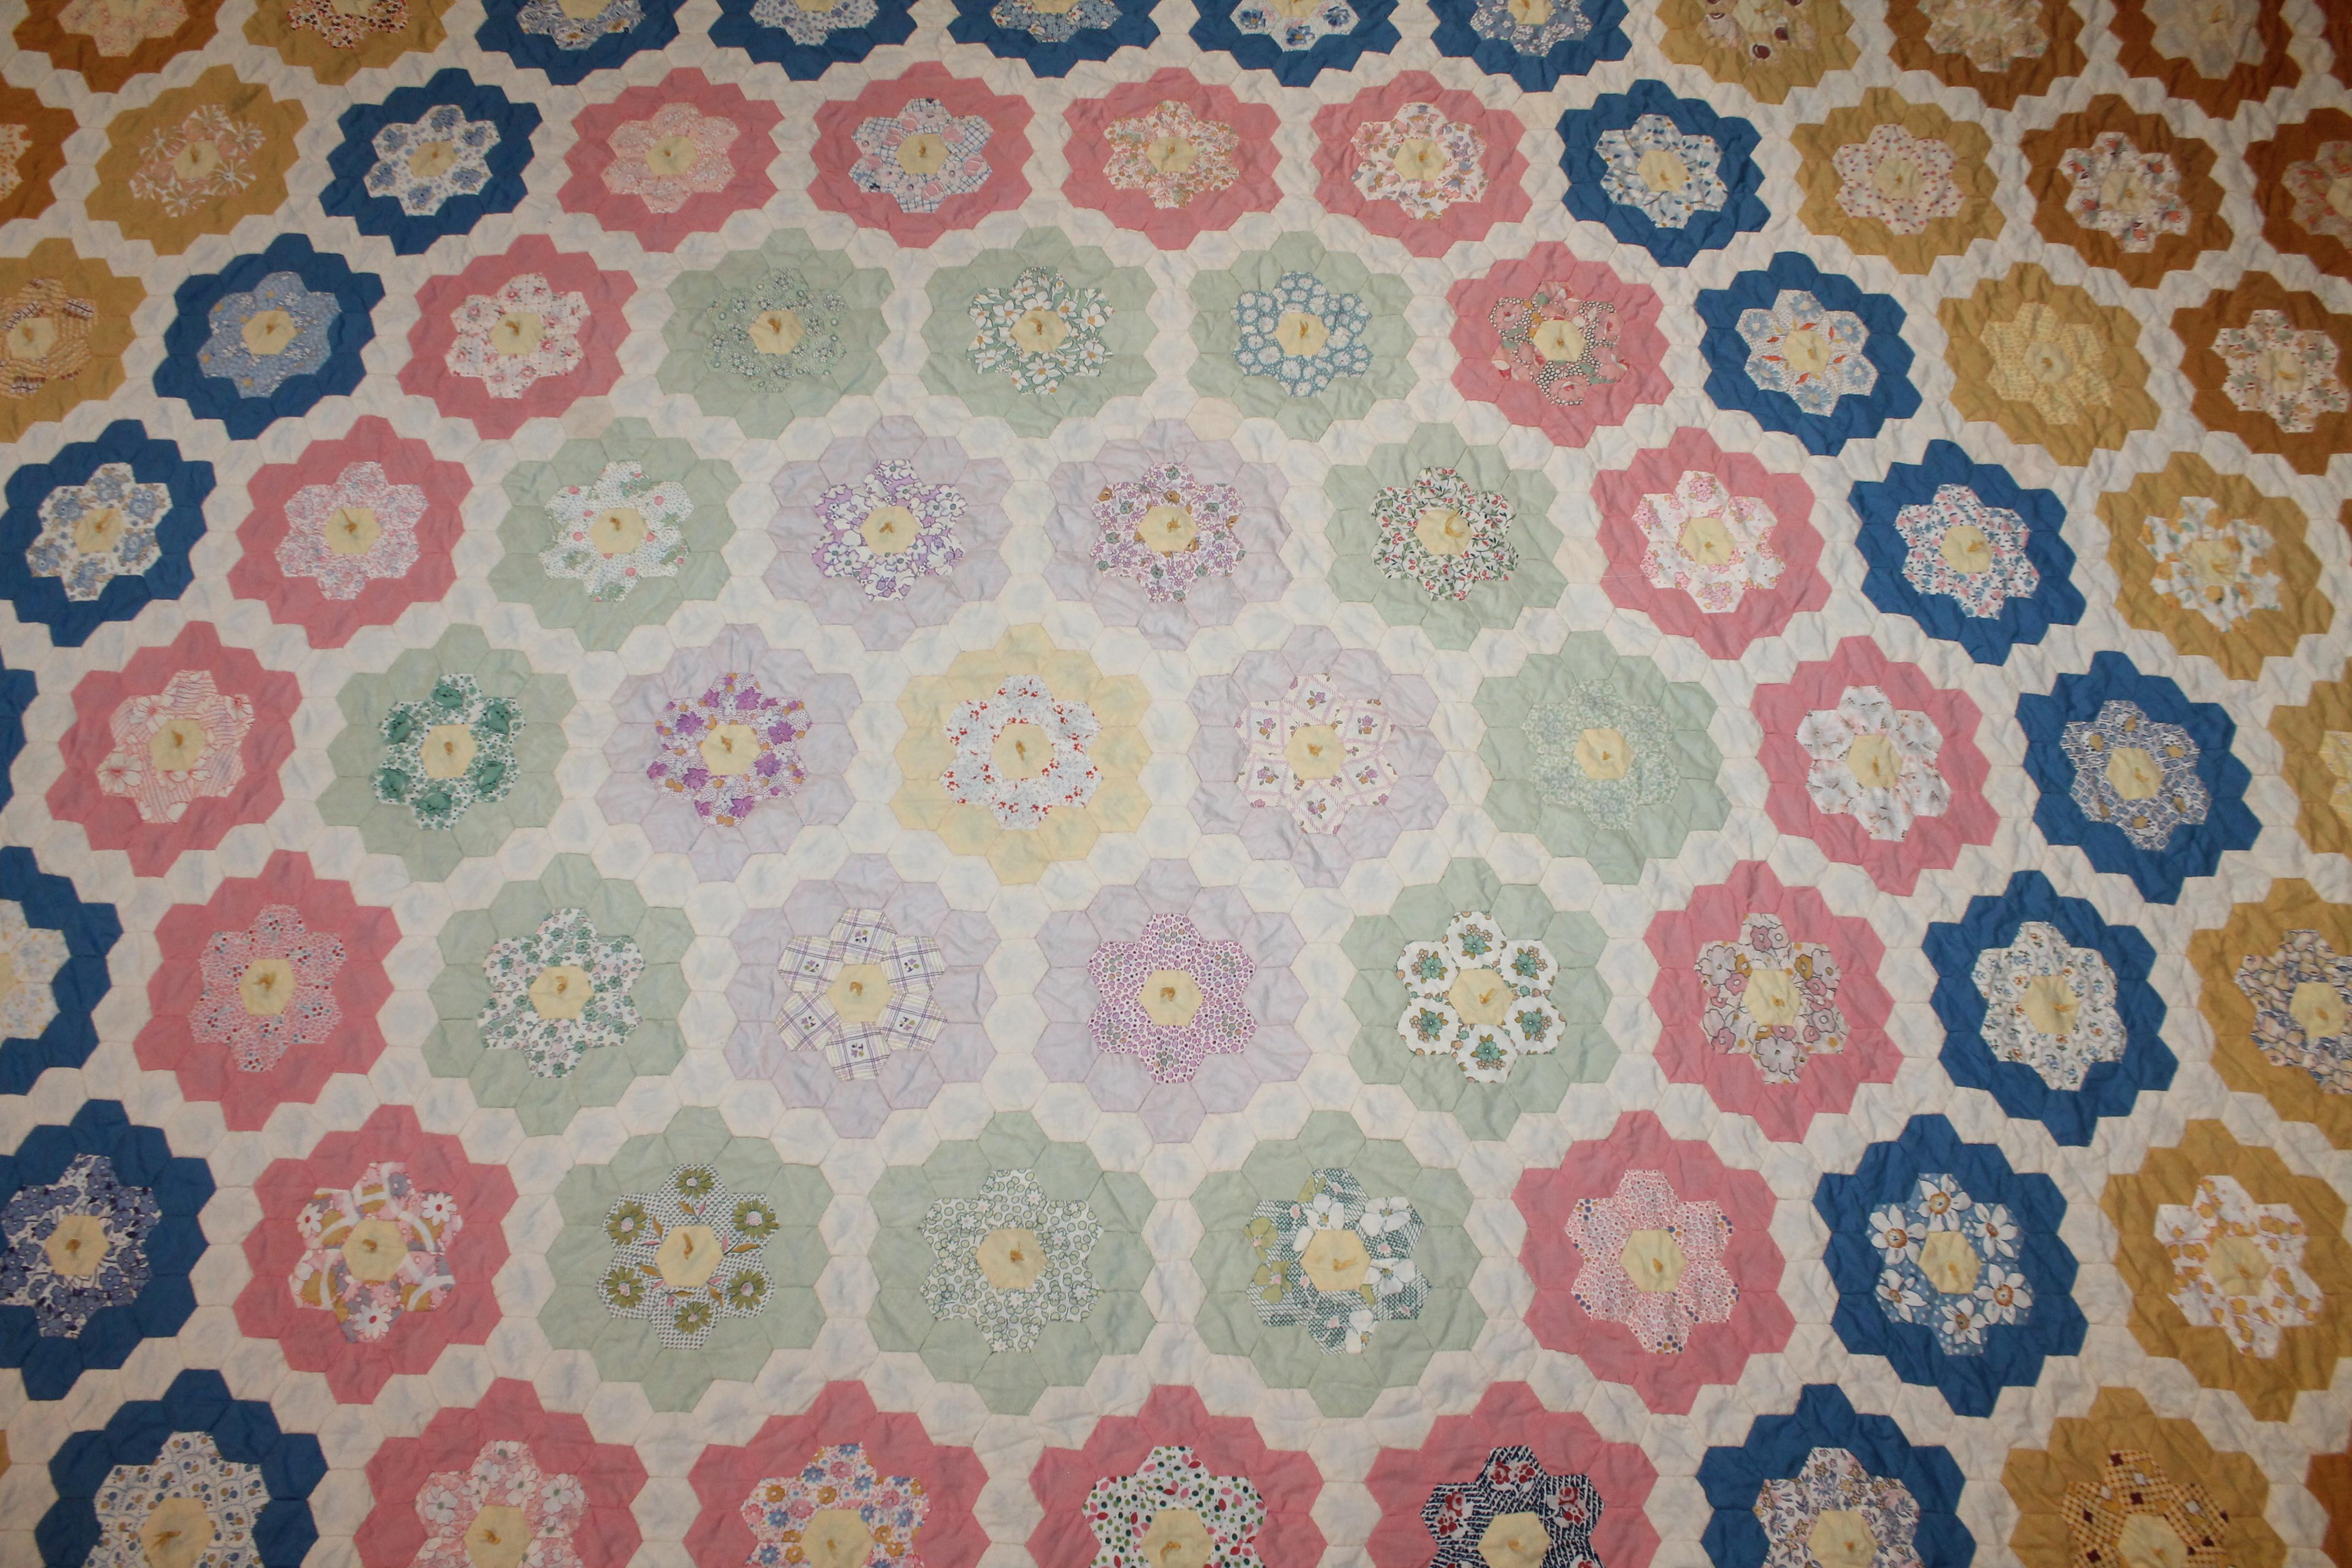 Early flower garden summer quilt with a blue shambray backing.
The condition is very good. This quilt has tiny stitching and piecing. It is also hand tied.
Early honey comb pattern.